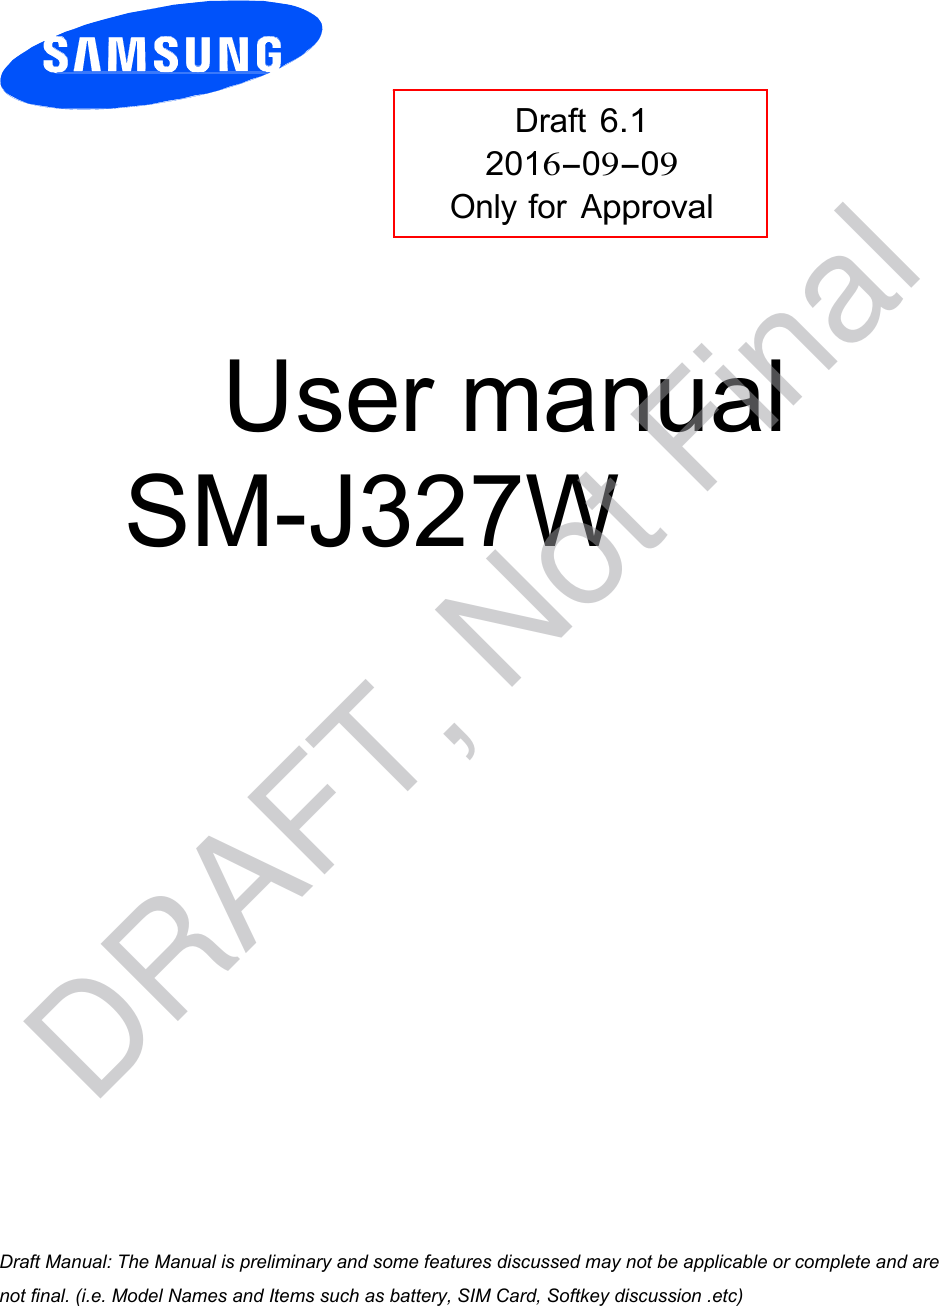 Draft 6.1 2016-09-09 Only for Approval User manual SM-J327Wa ana  ana  na and  a dd a n  aa   and a n na  d a and   a a  ad  dn DRAFT, Not Final